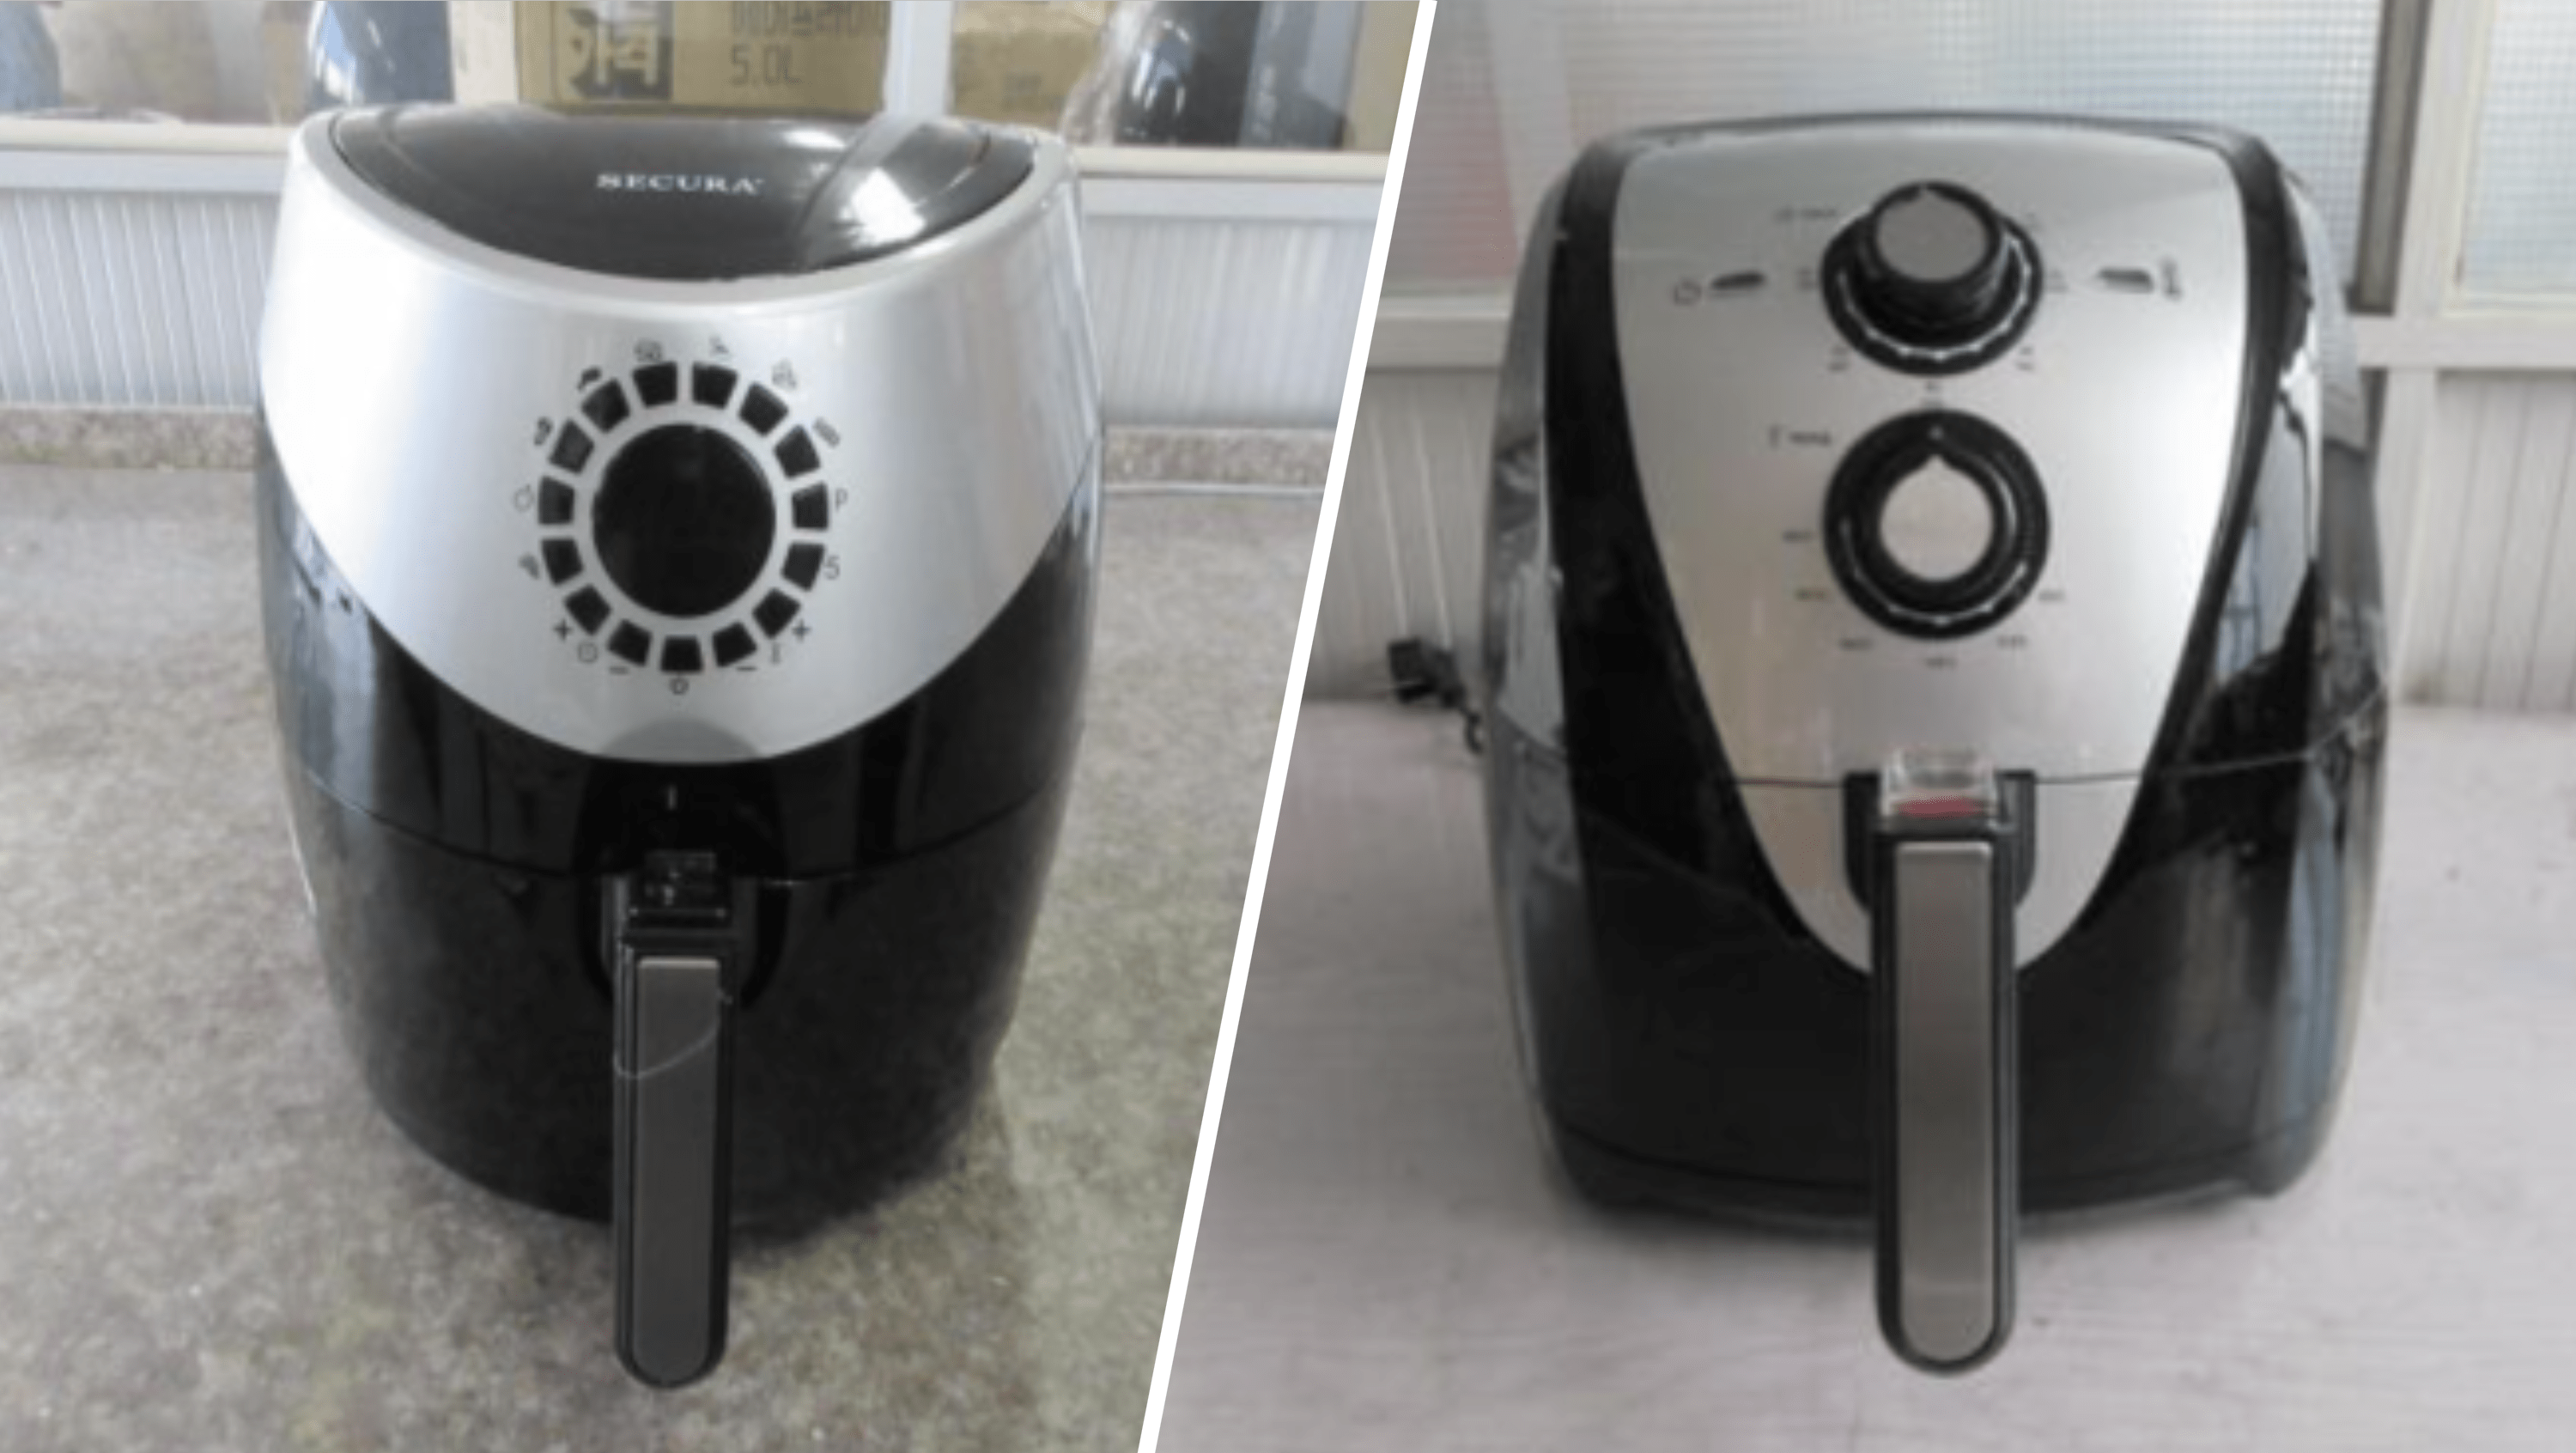 Air Fryer Recall Lawsuits: When Innovations Bring Injuries